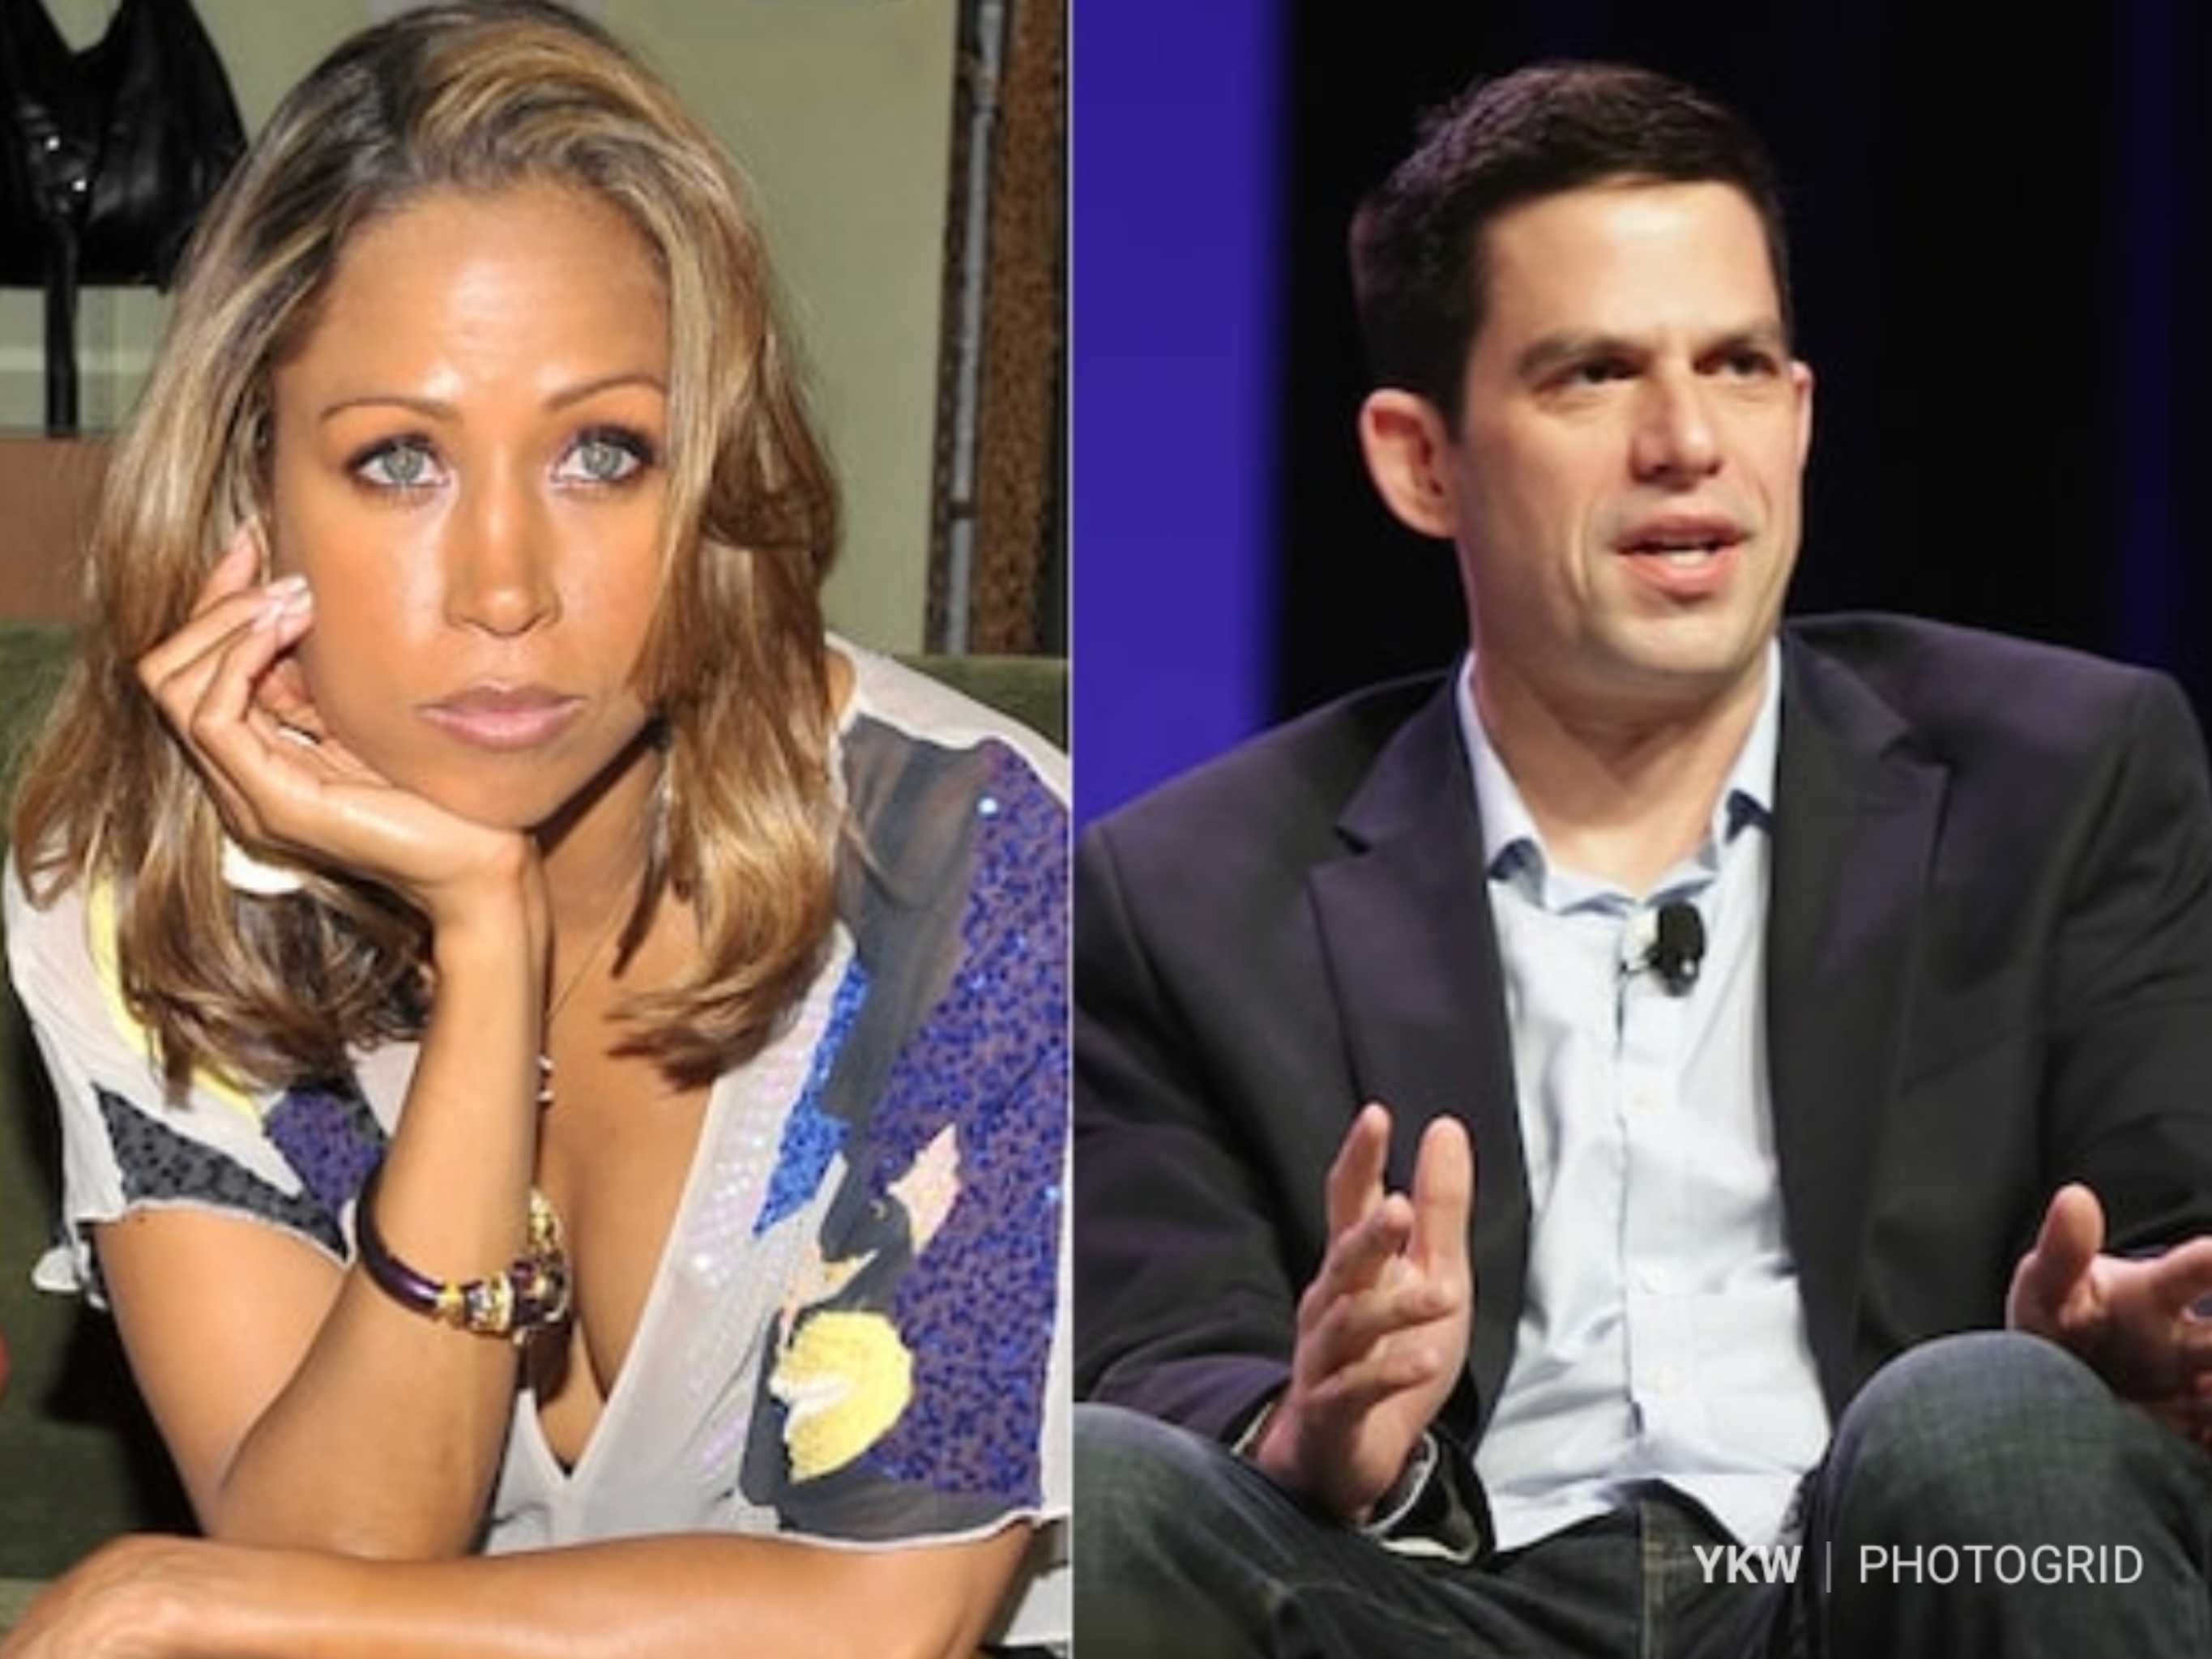 “Clueless” Actress Stacey Dash Arrested For Allegedly Assaulting Her New Husband